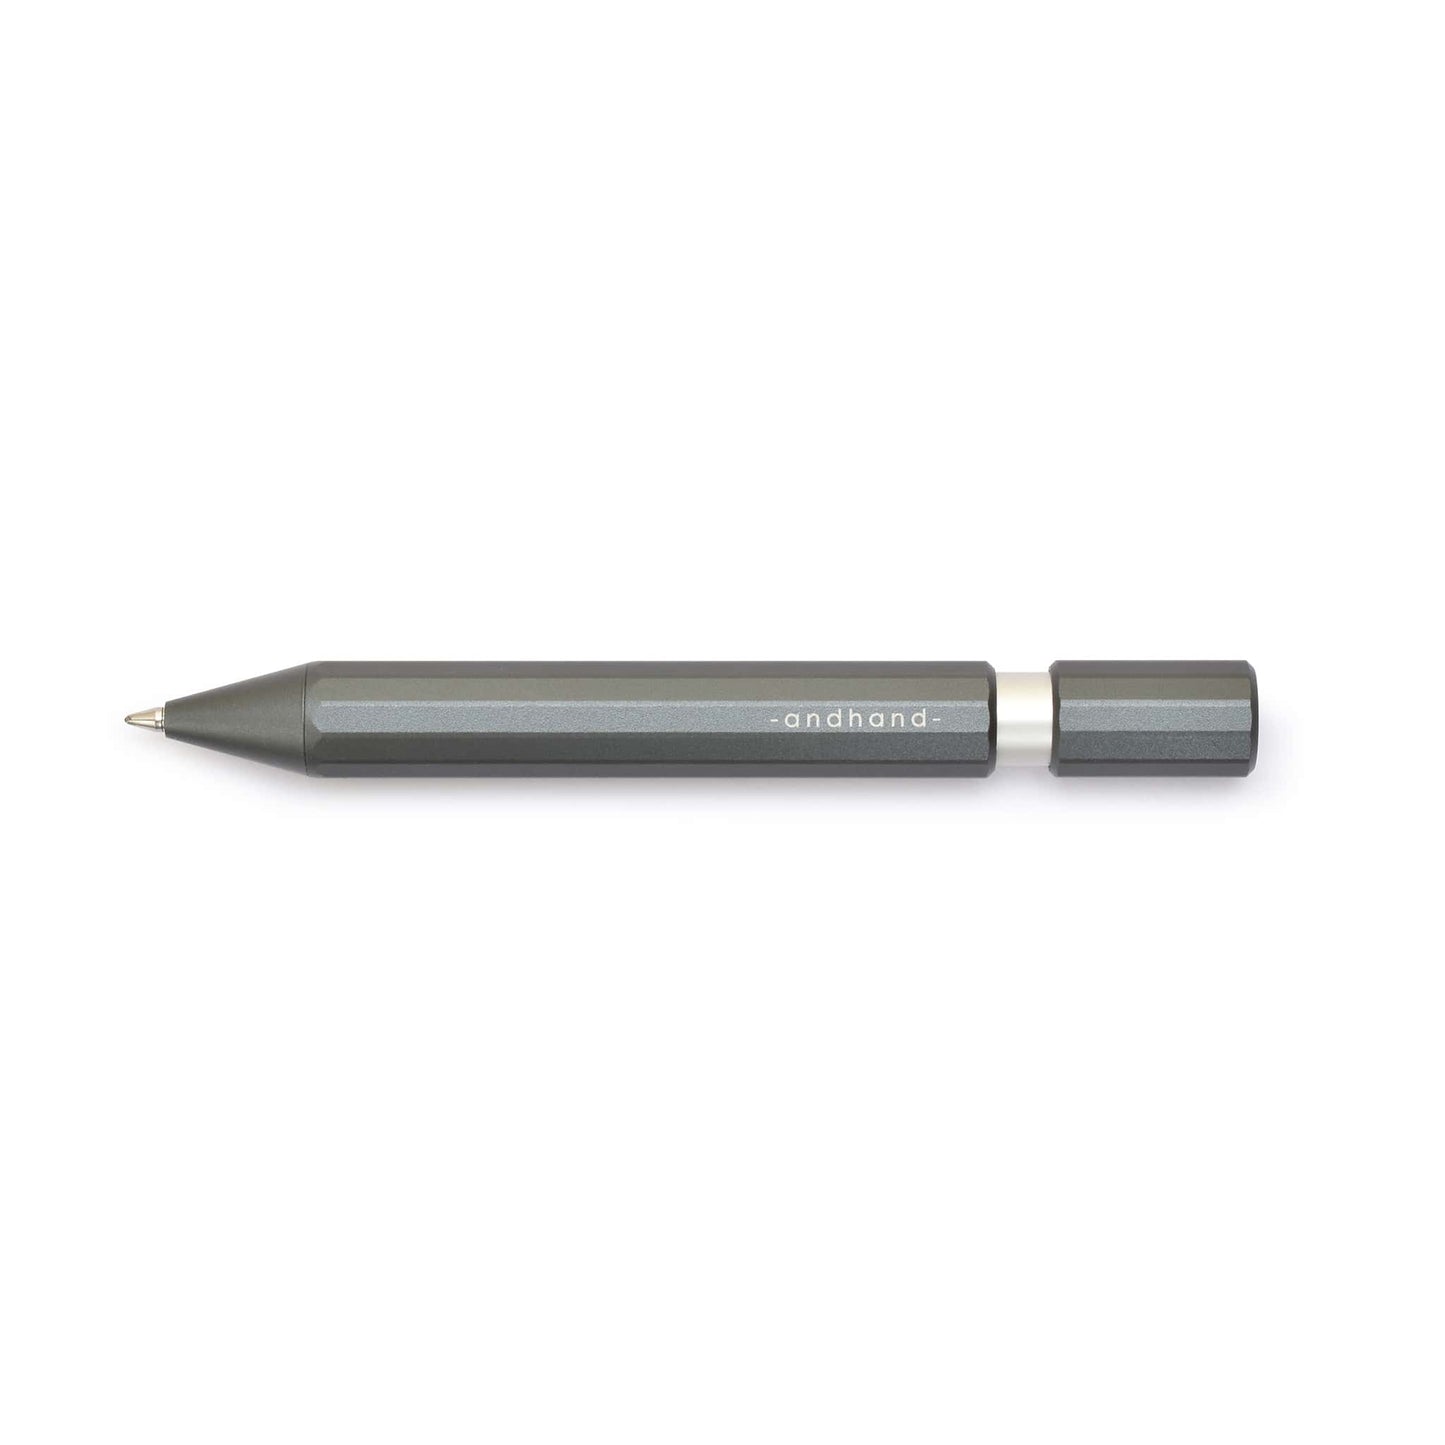 Aspect retractable pen in slate grey anodized finish. A great pen for journaling, sketching or note taking. Equipped with a capless system rollerball cartridge for great ink flow.